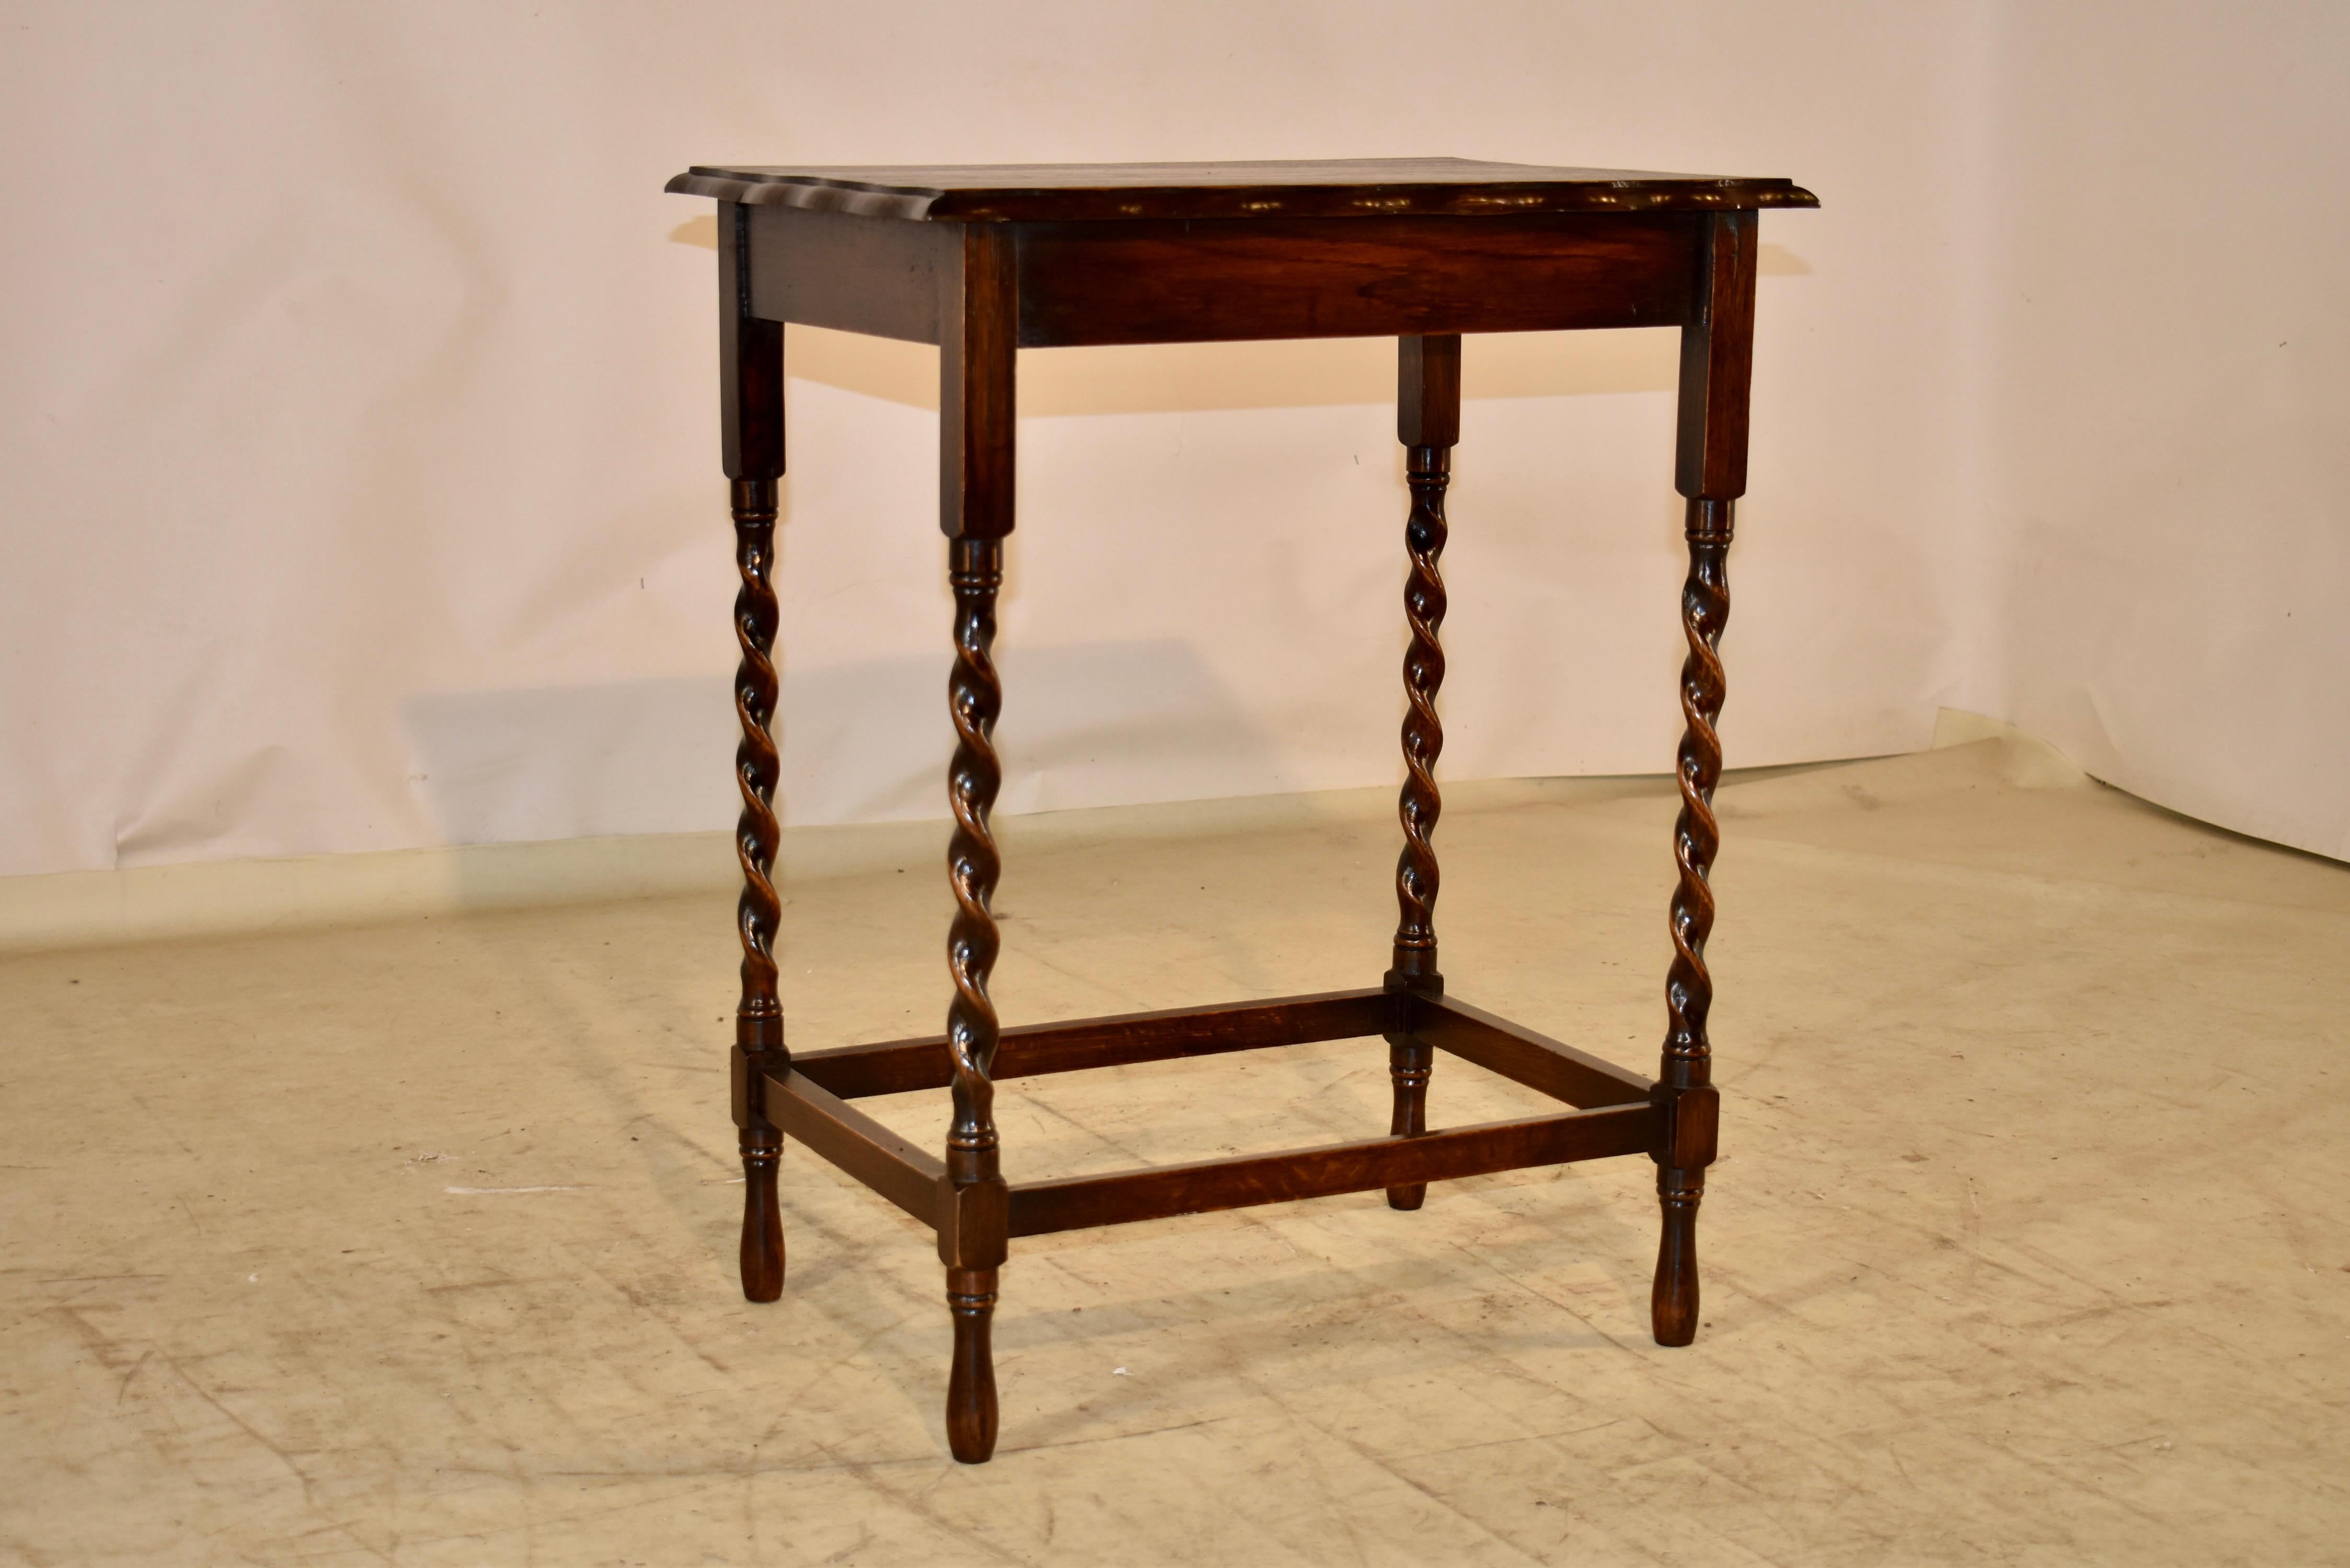 Circa 1900 English oak side table with a beveled and scalloped edge around the top, following down to a simple apron.  the table is supported on hand turned barley twist legs, joined by simple stretchers.  Raised on turned feet.